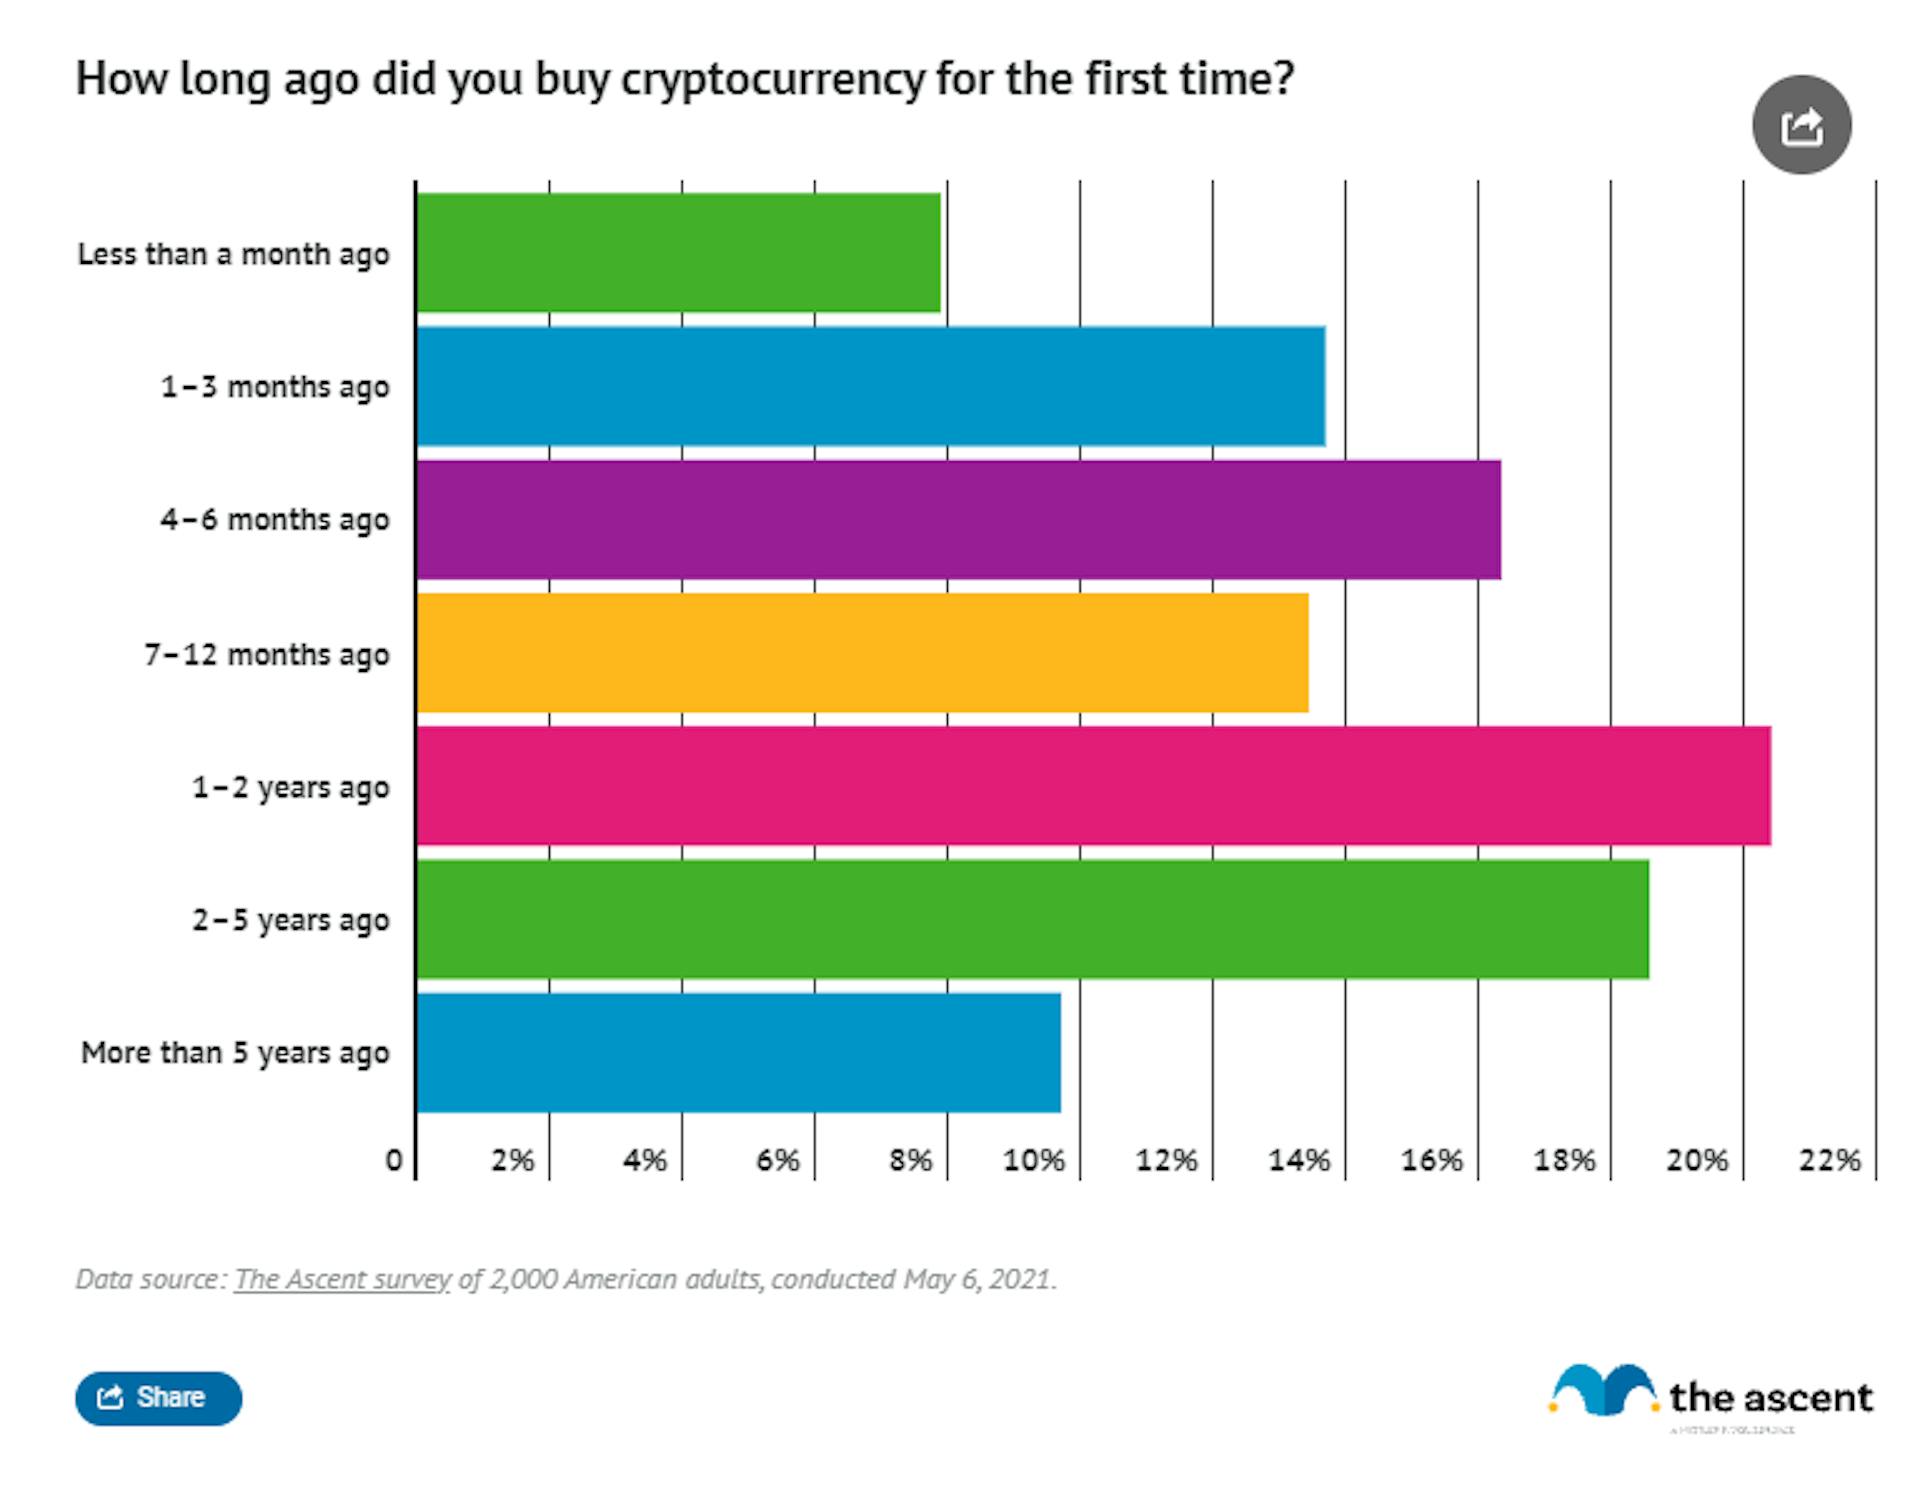 Most people bought cryptocurrency for the first time 1-2 years ago